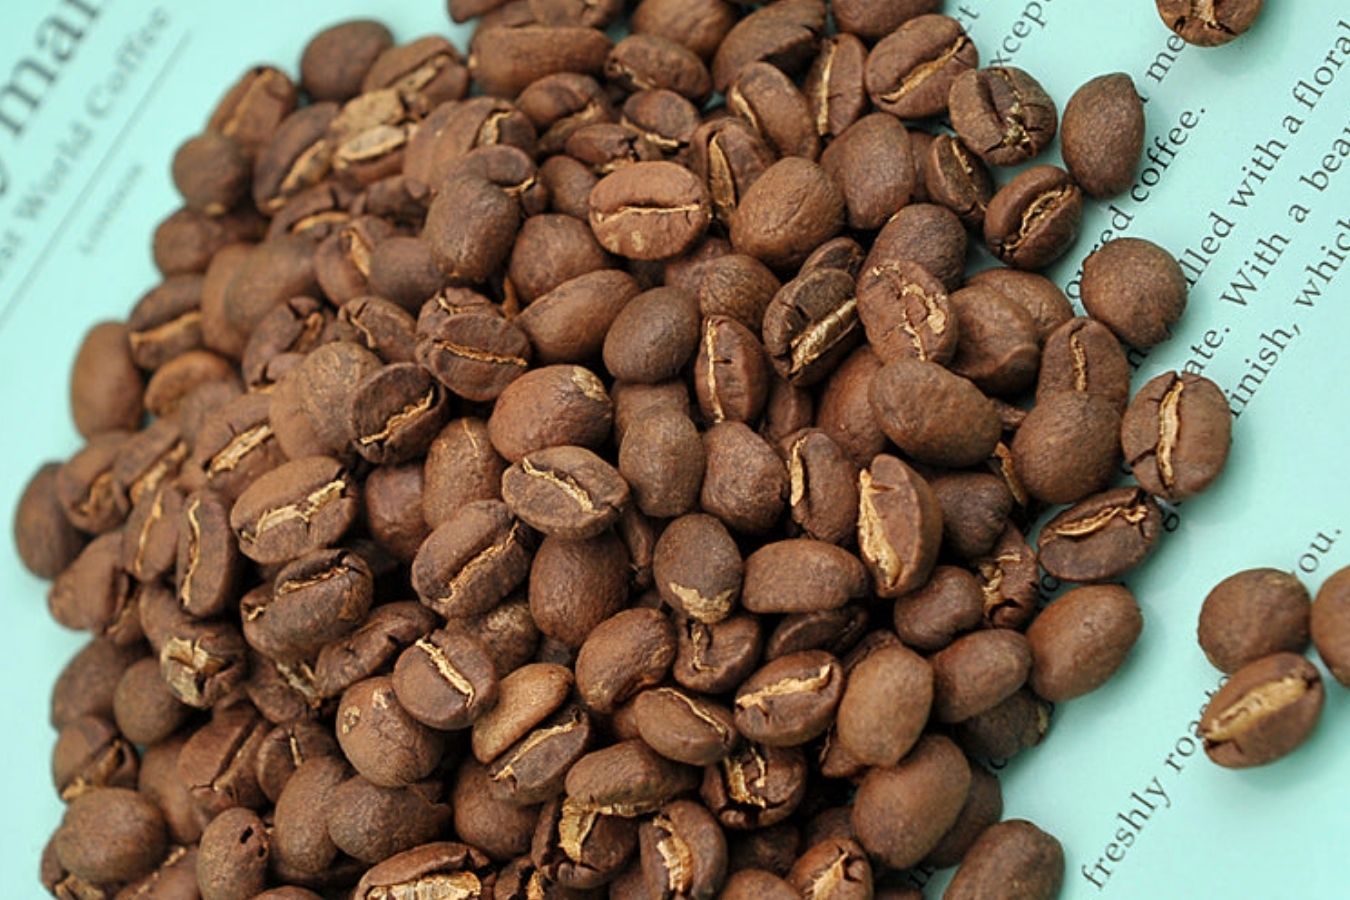 the-best-coffee-beans-top-15-types-of-best-bean-coffee-and-most-popular-in-the-world (4)